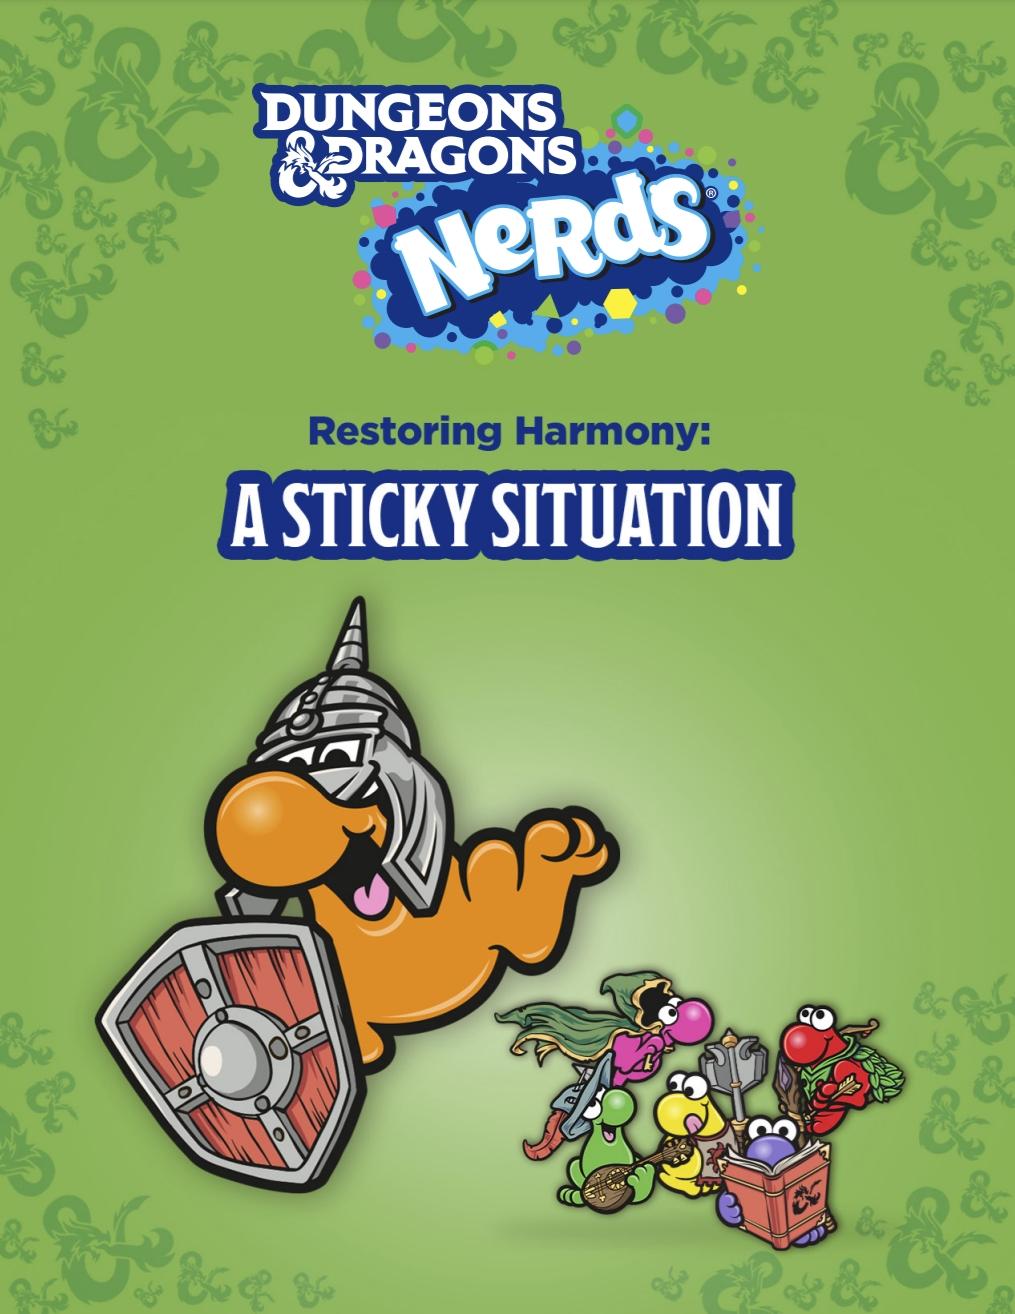 NERDS Dungeons & Dragons Adventure 3 – A Sticky Situation